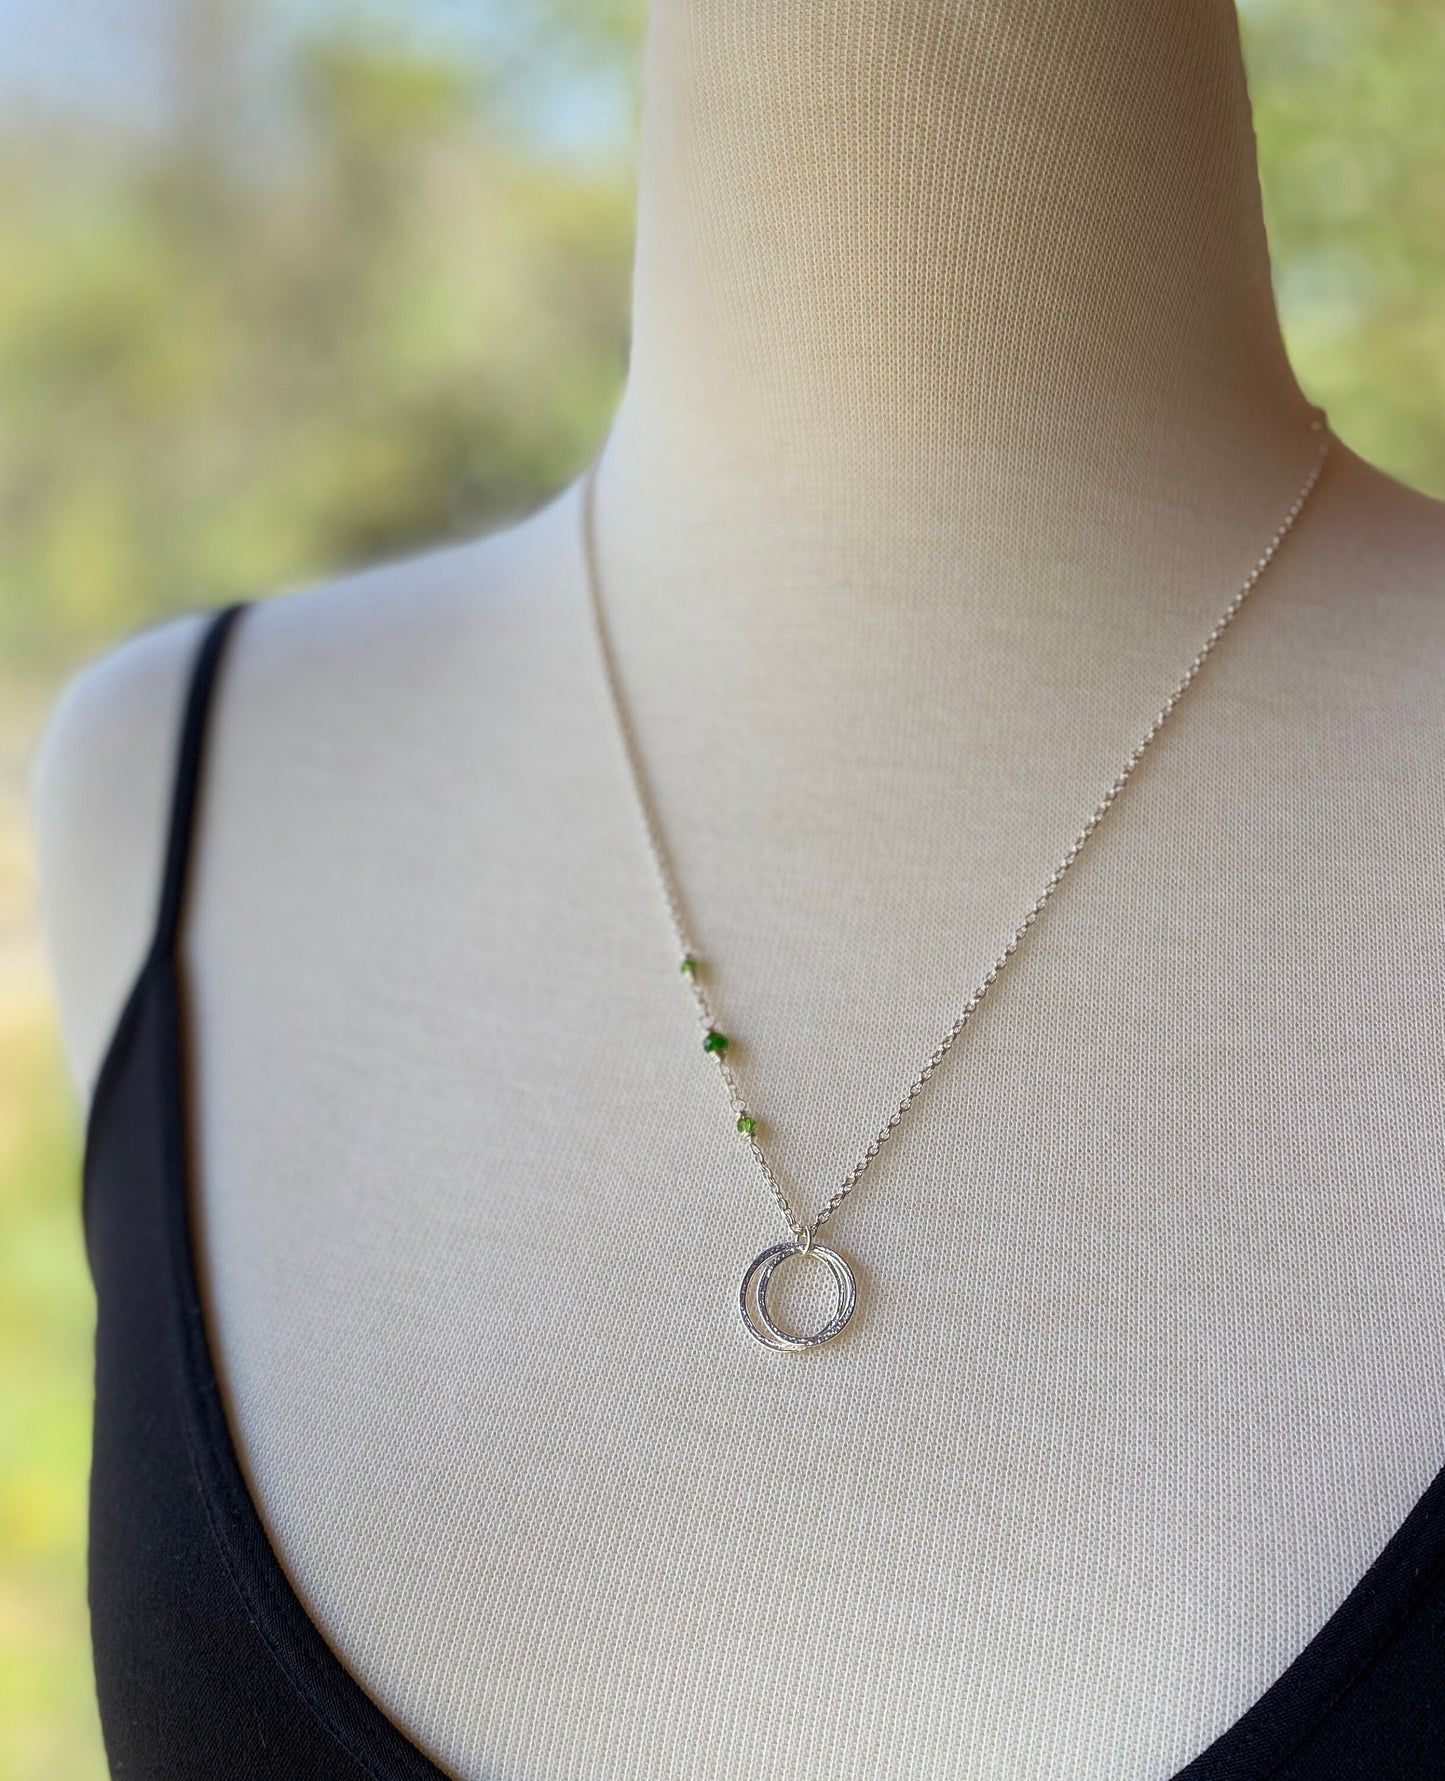 20th Birthday Minimalist Necklace with Birthstones, Sterling Silver 2 Rings for 2 Decades Milestone Jewelry, 2 Circle Necklace, Love, Unity